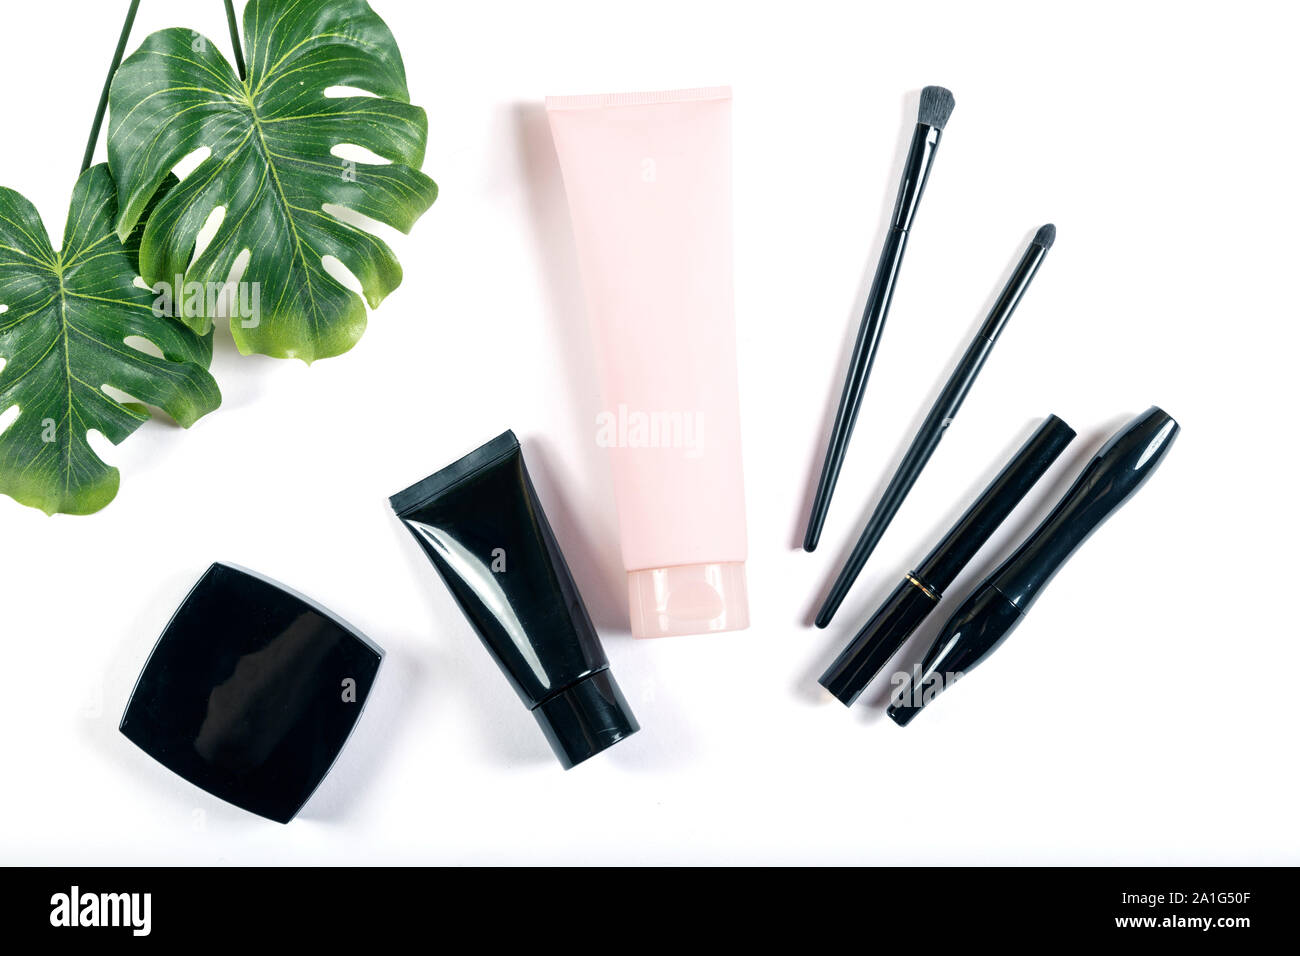 Beauty products/cosmetics still photography/flat lay for lifestyle magazine, editorial, beauty retailer, high class cosmetic brand, etc. Stock Photo